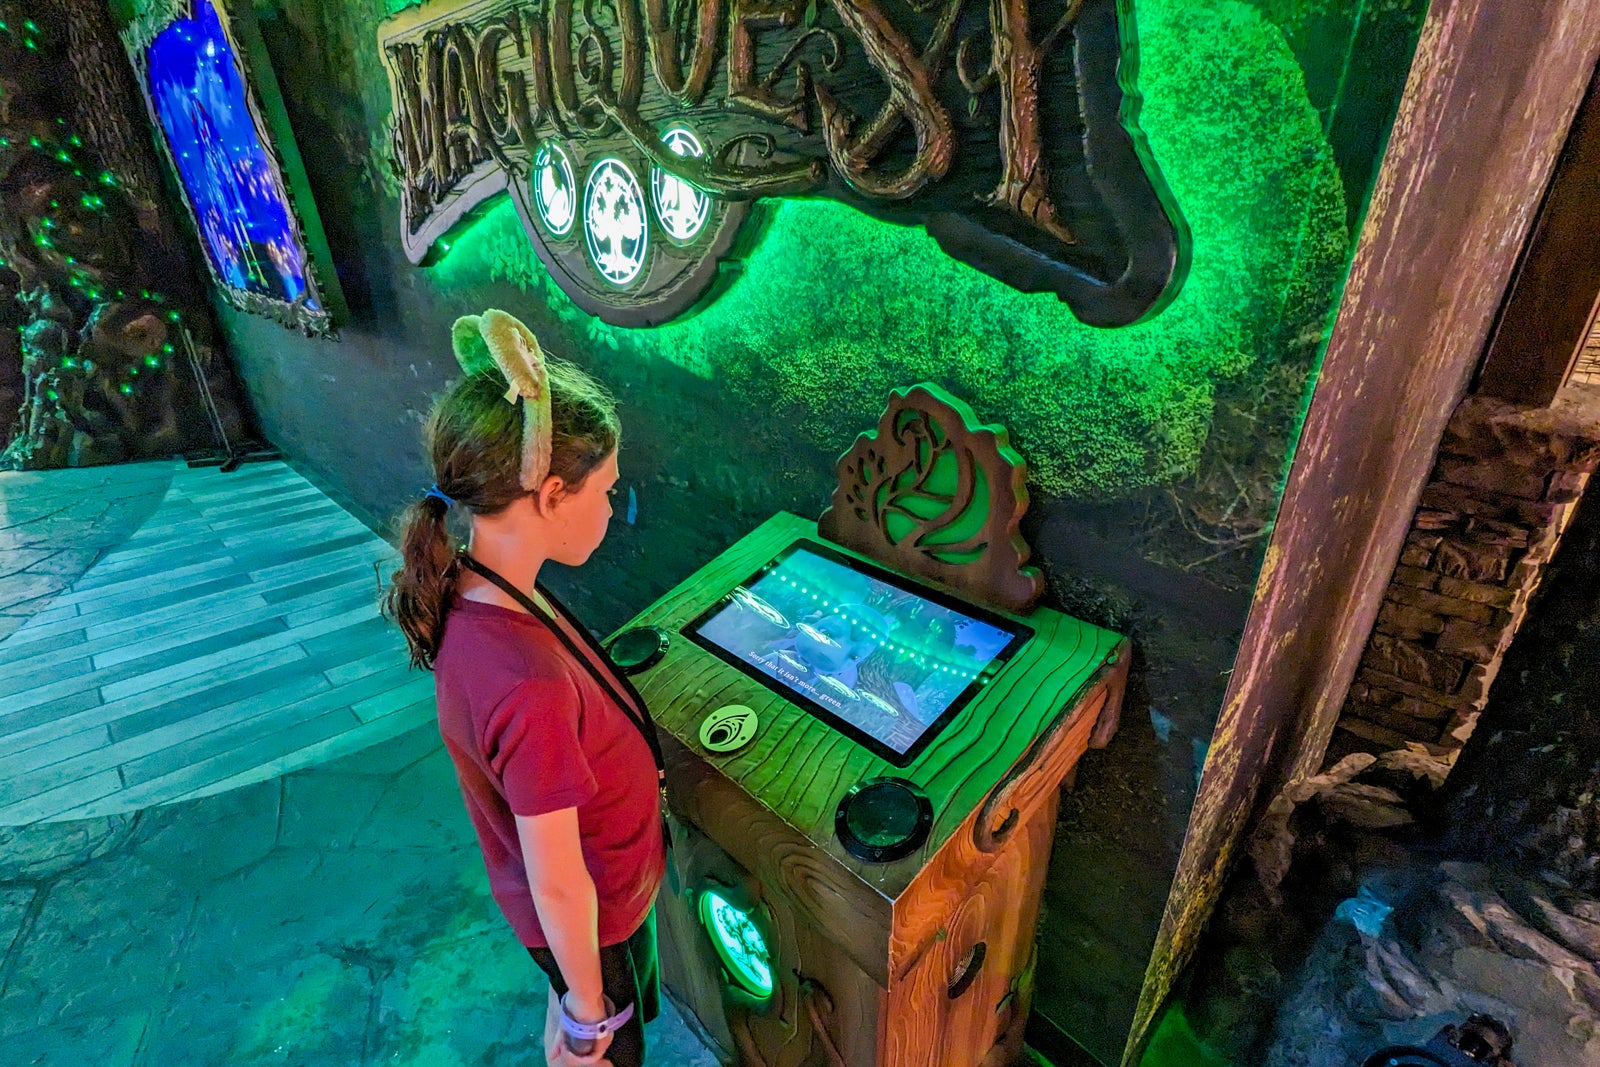 Girl with wolf ears headband looking at a screen under MagiQuest sign.